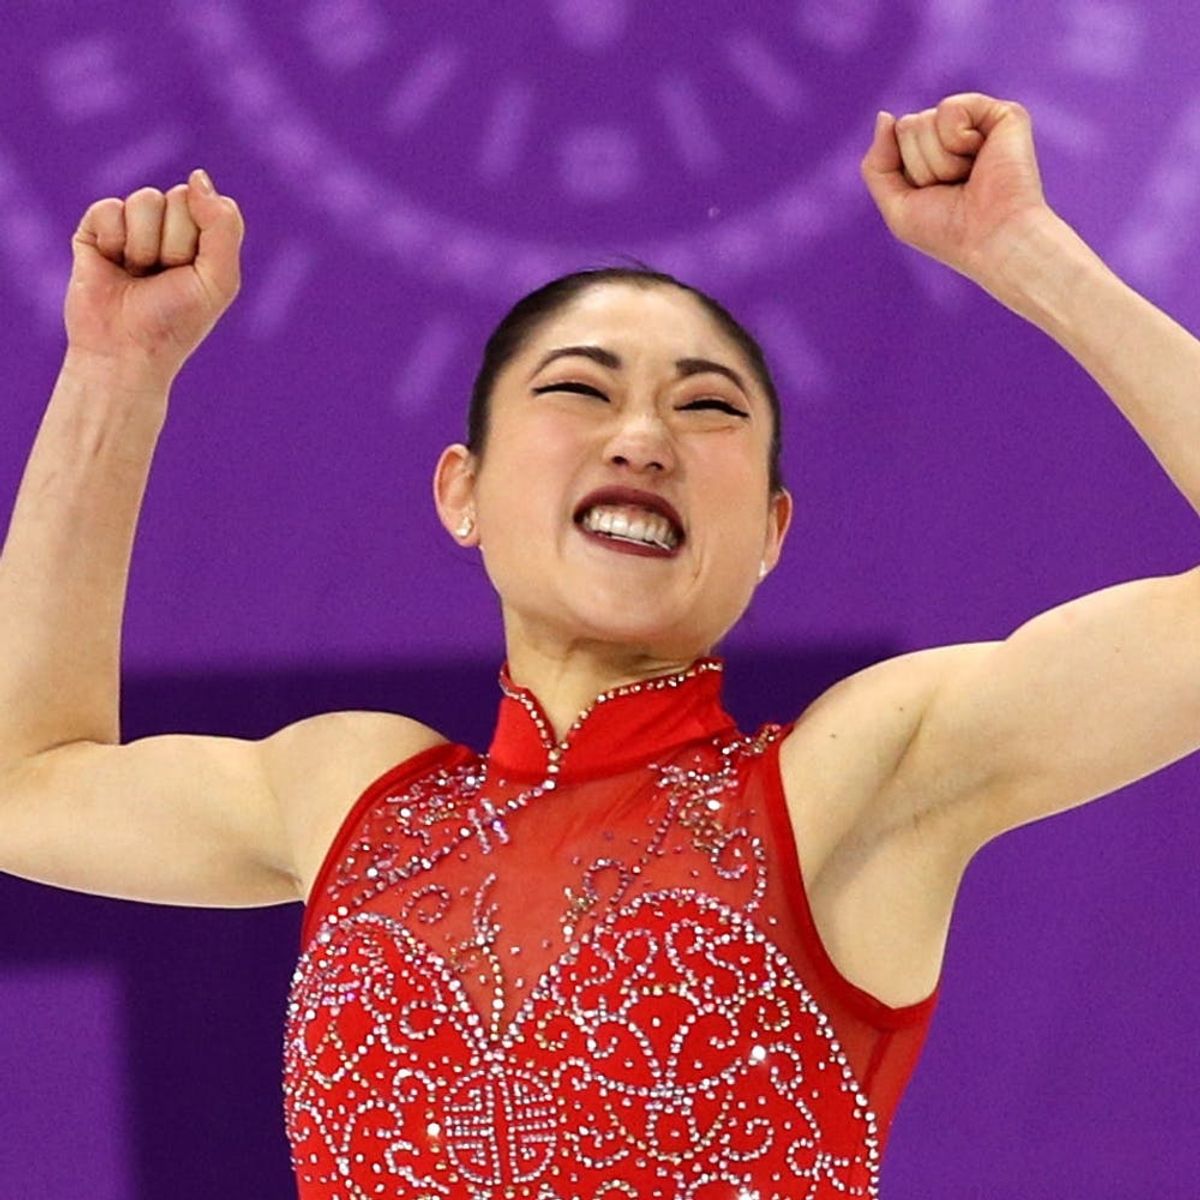 Mirai Nagasu Just Became the First American Woman to Land a Triple Axel at the Olympics